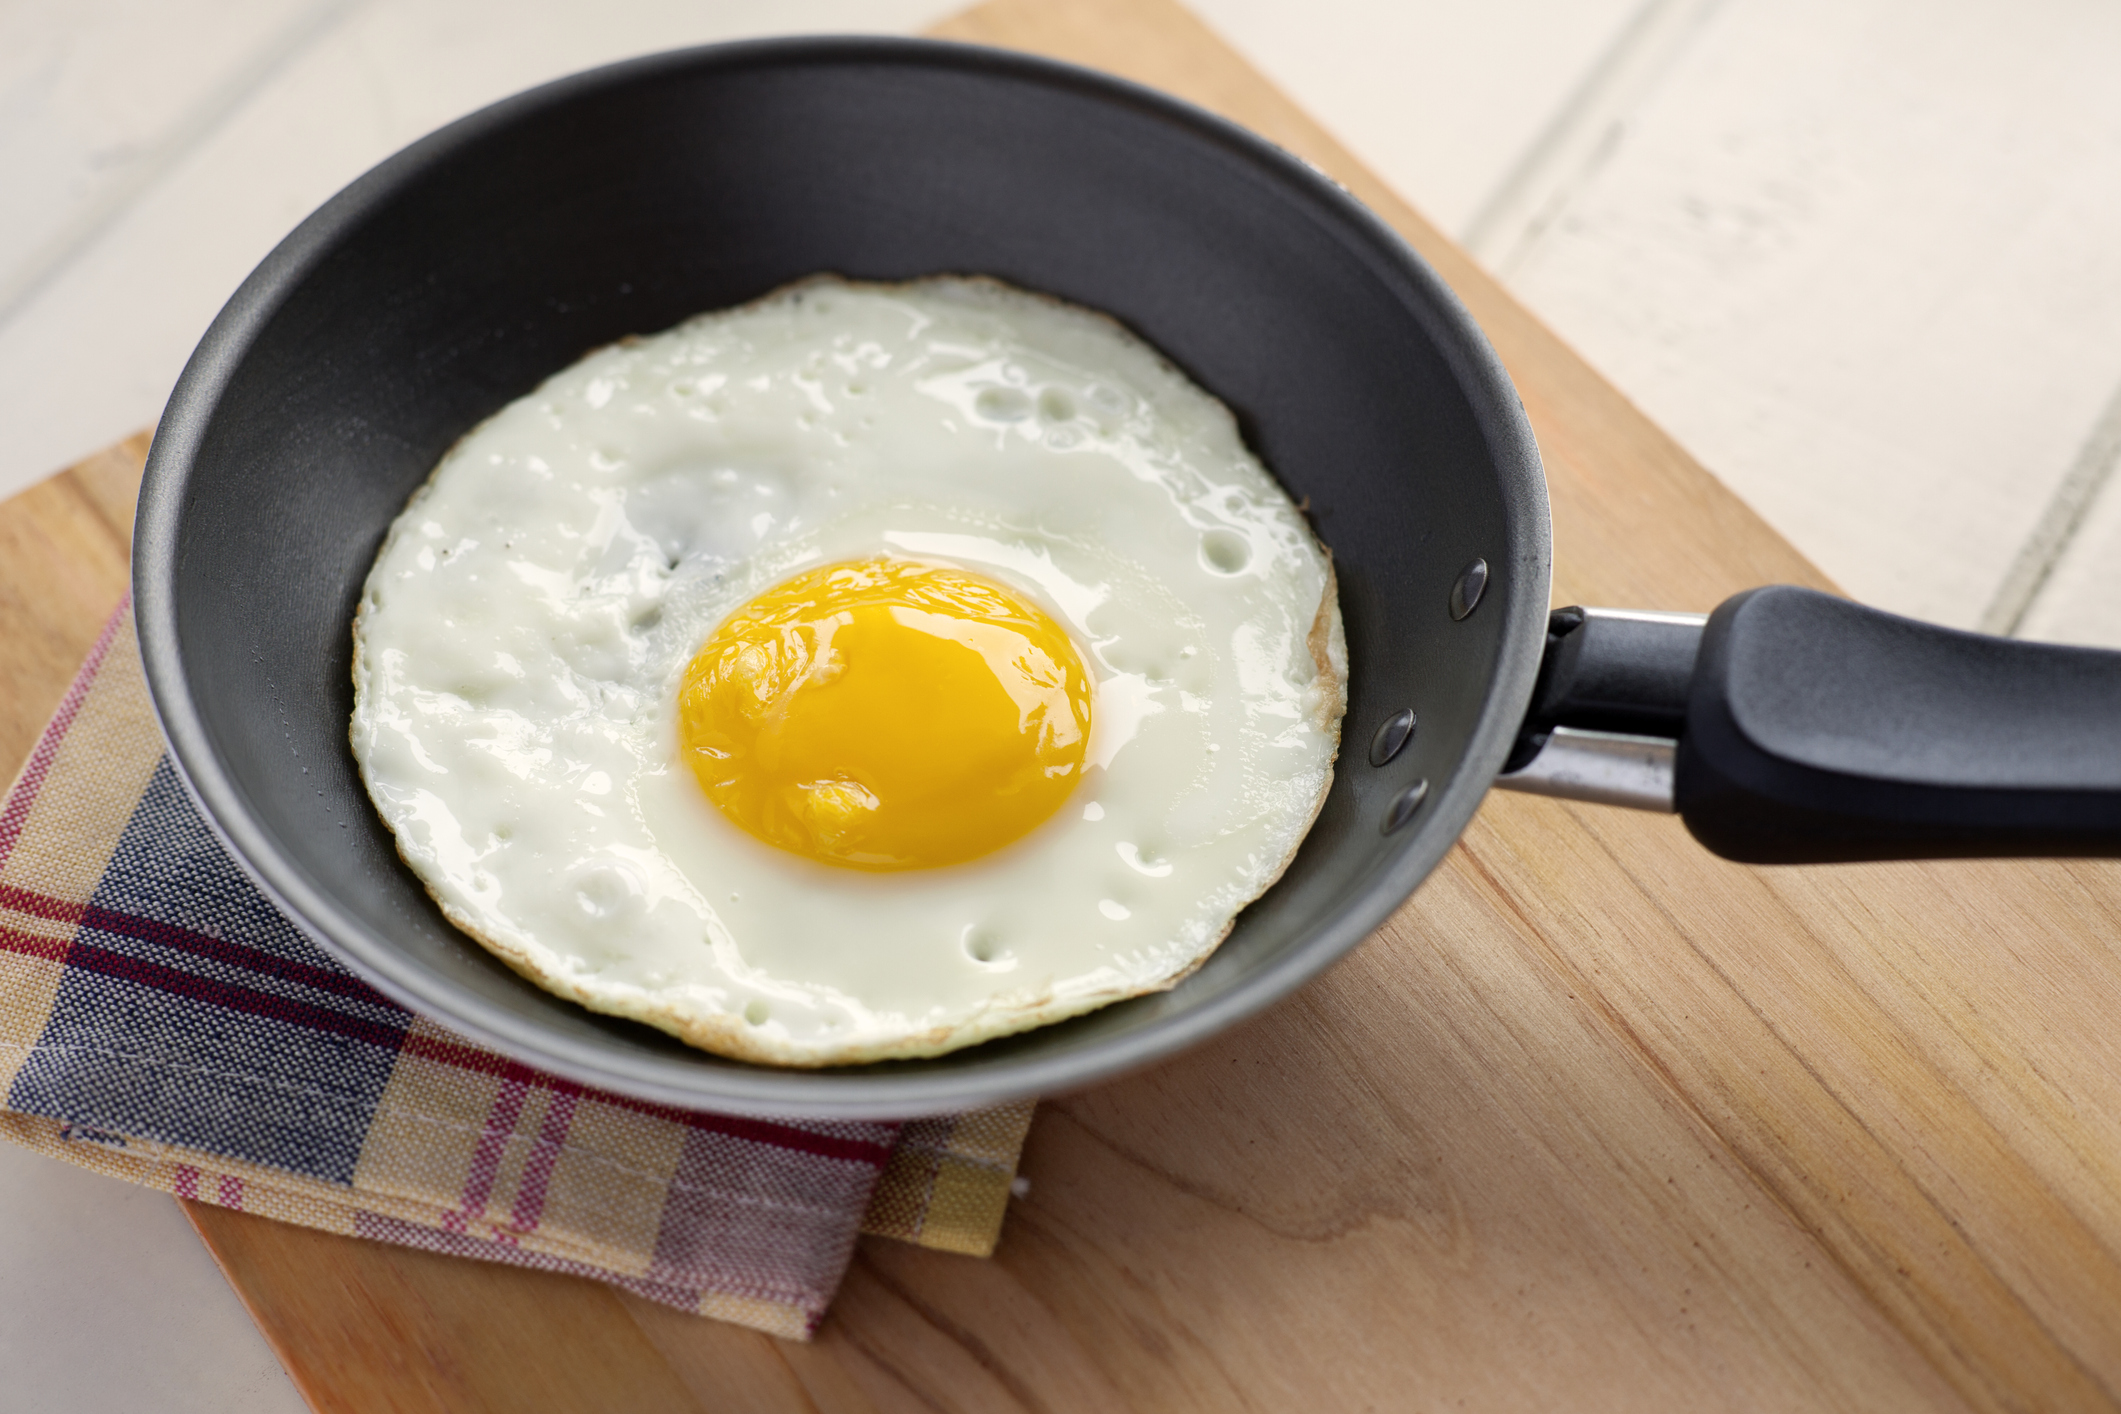 The Single Egg Pan: Best Three Choices for A One Egg Pan - The